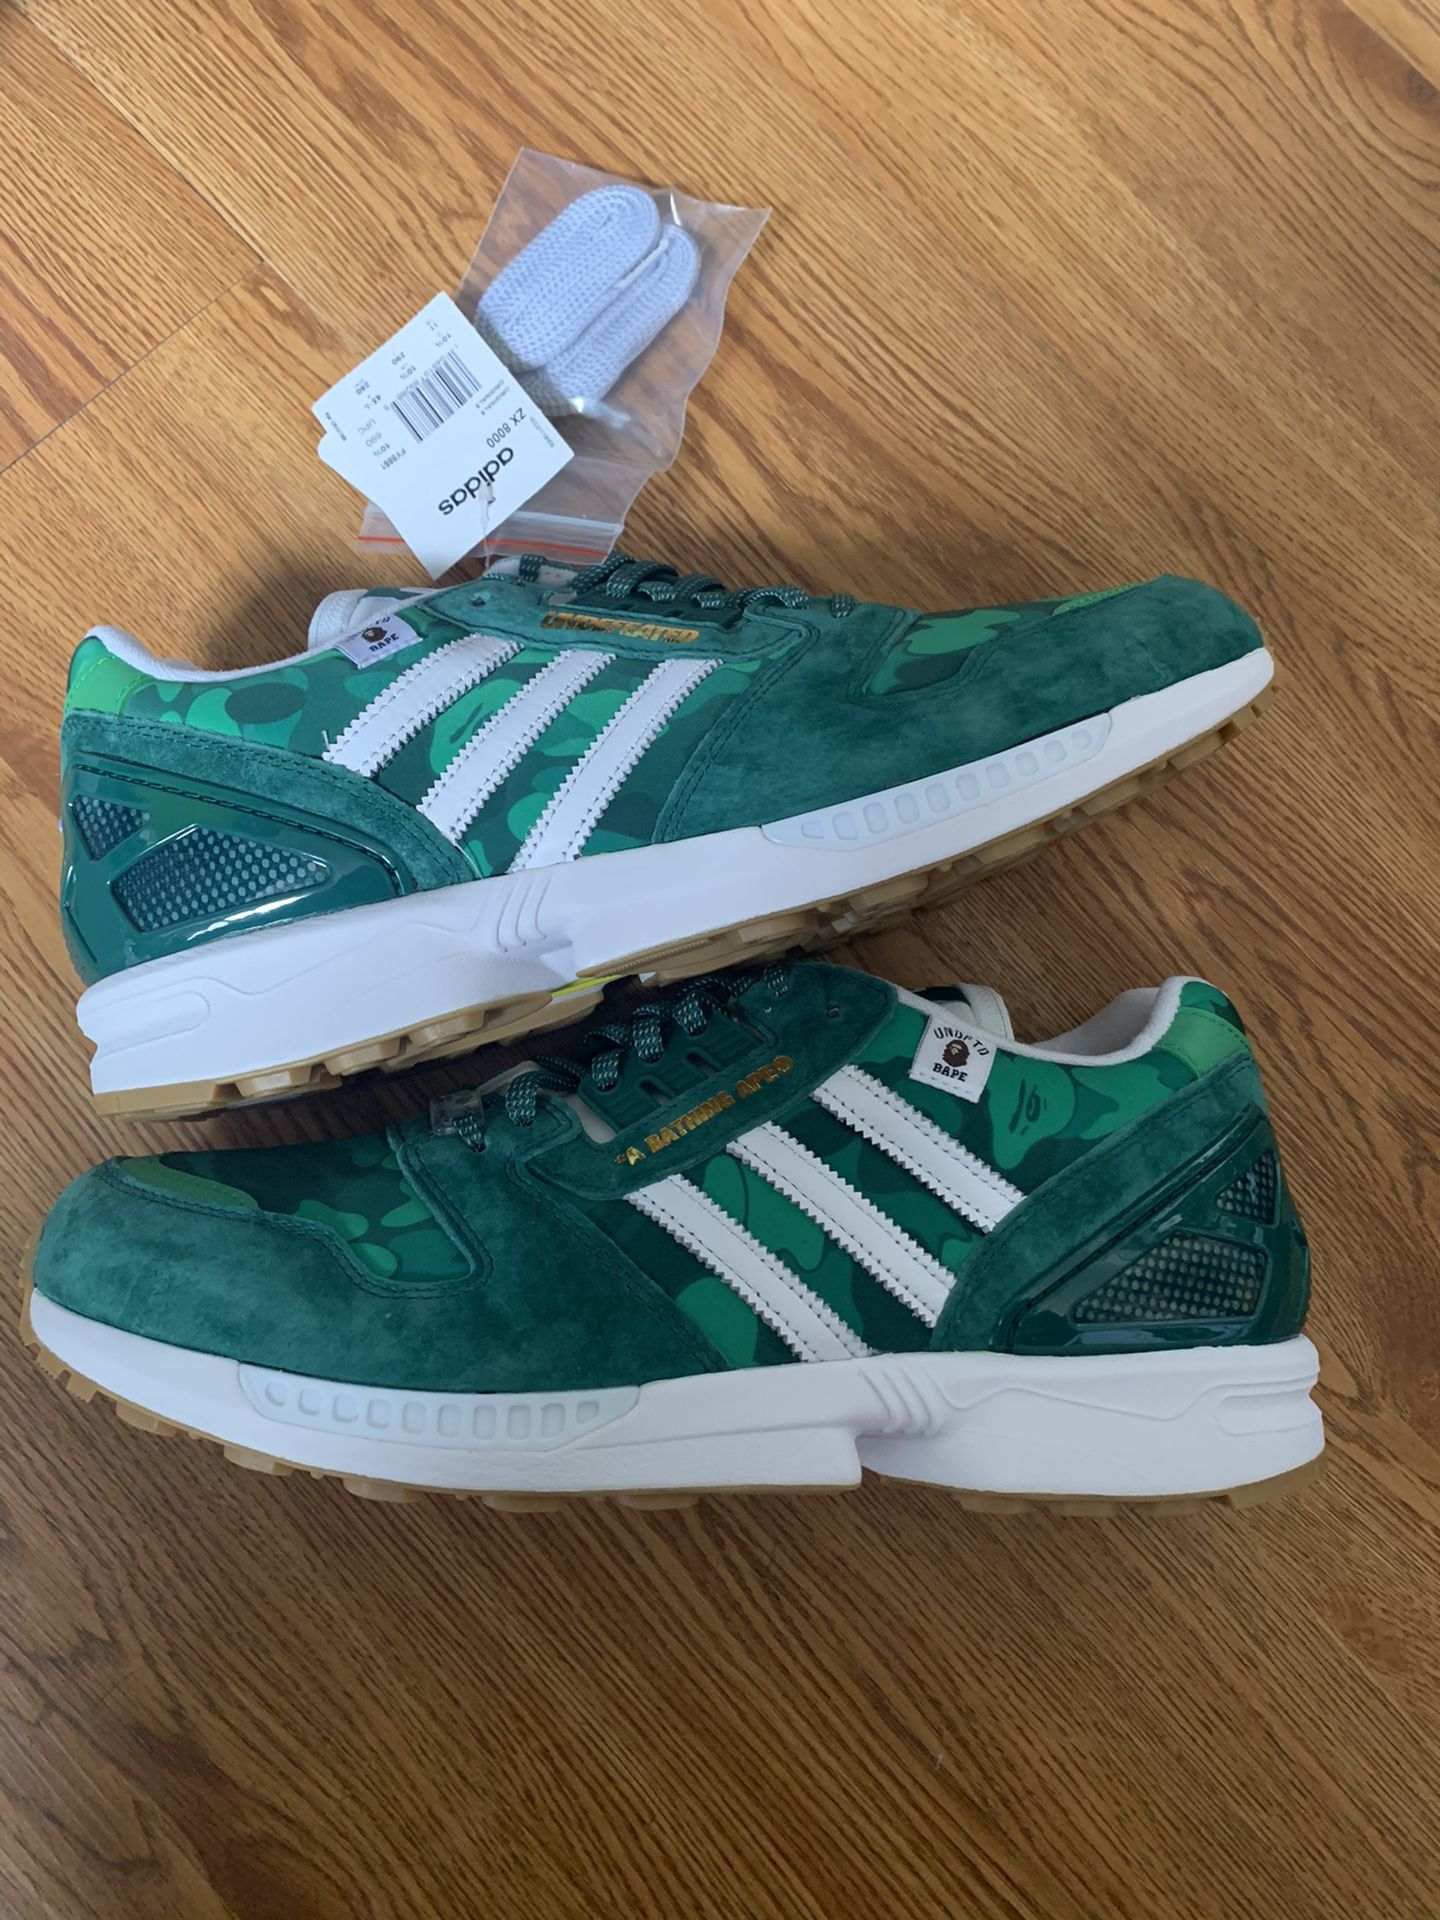 Adidas x Undefeated x Bape ZX8000 Size 11 Deadstock